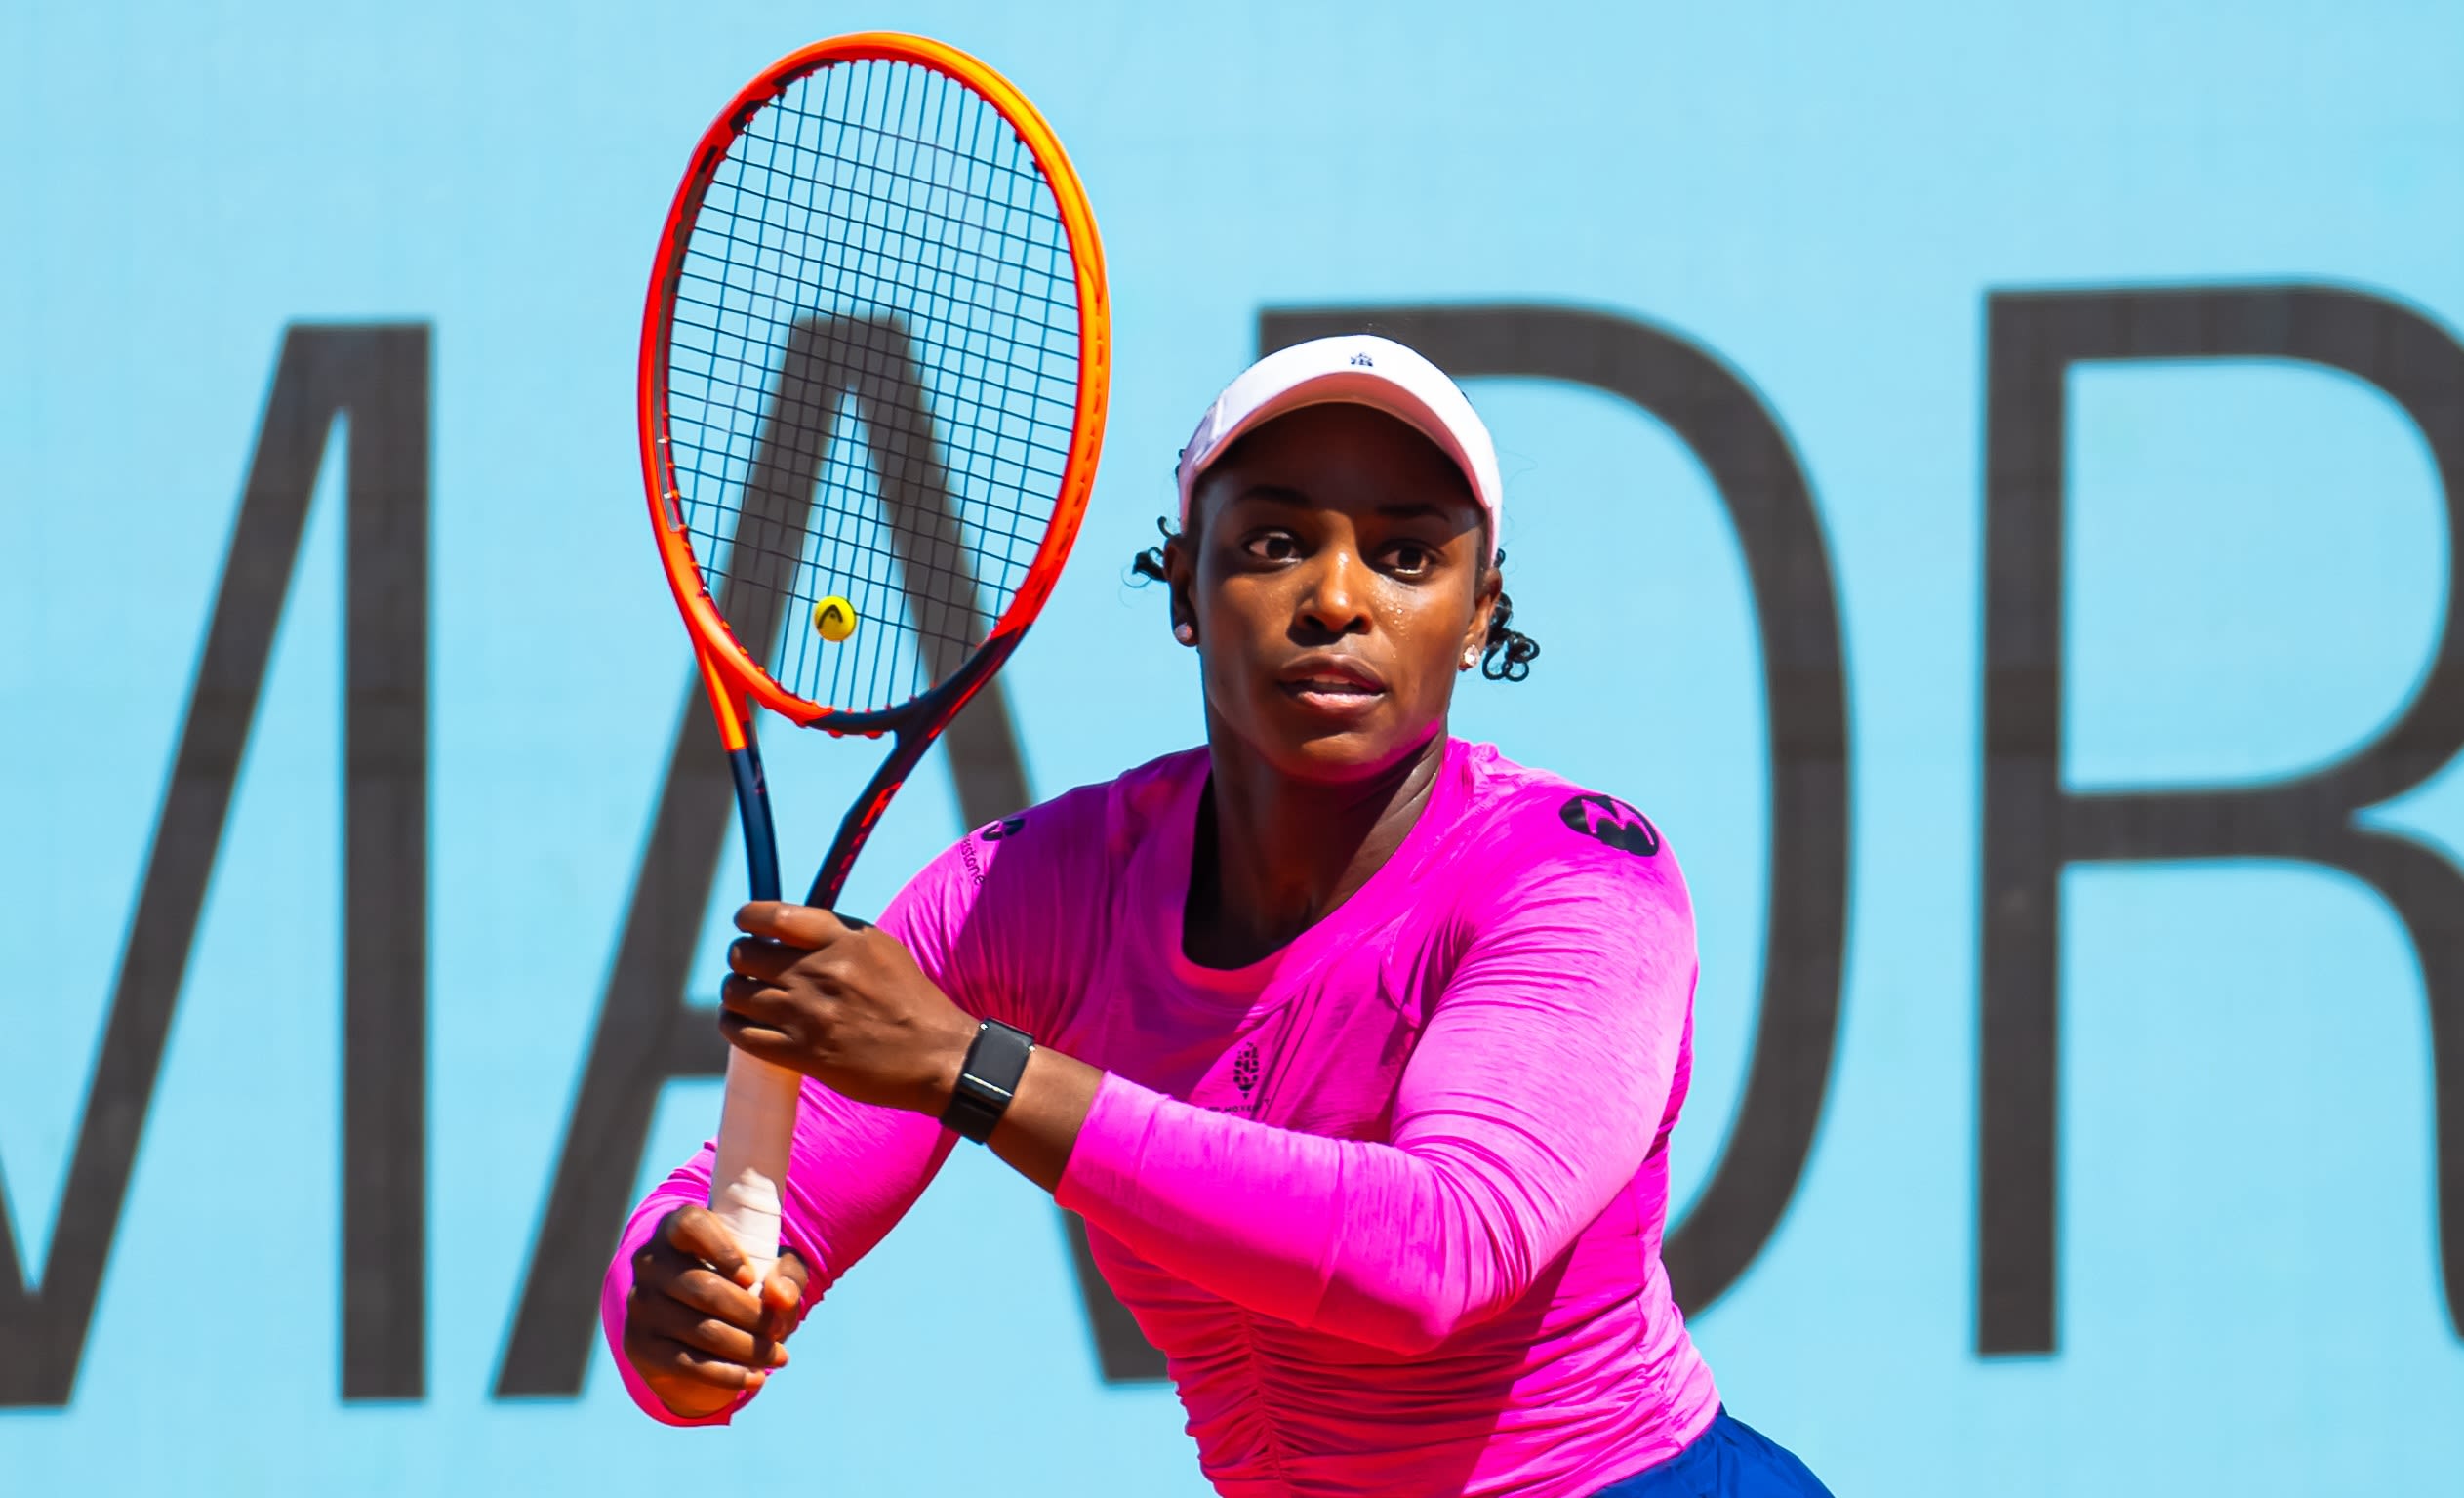 Despite jet lag, Sloane Stephens keeps winning in Madrid with big goals for clay swing | Tennis.com